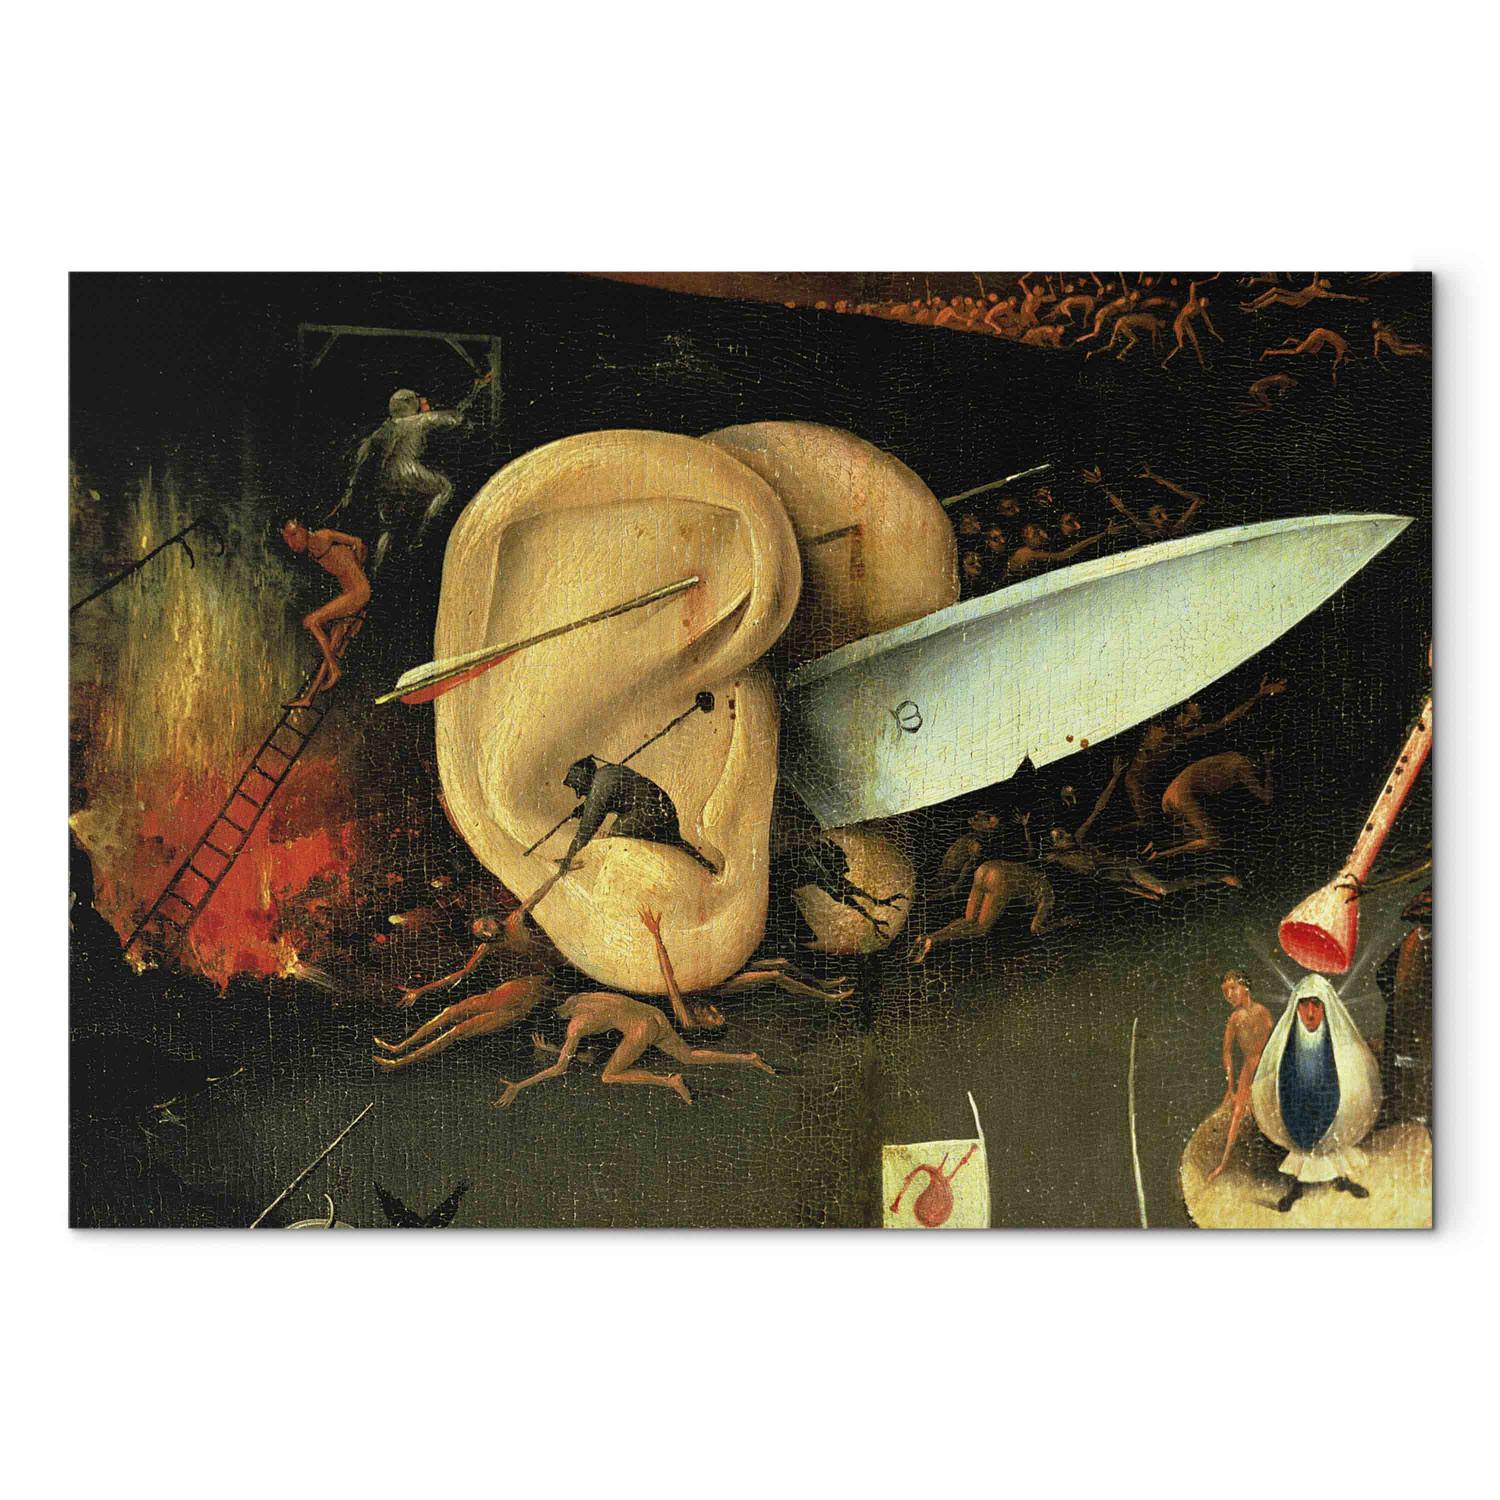 Reproducción de cuadro The Garden of Earthly Delights: Hell, right wing of triptych, detail of ears with a knife